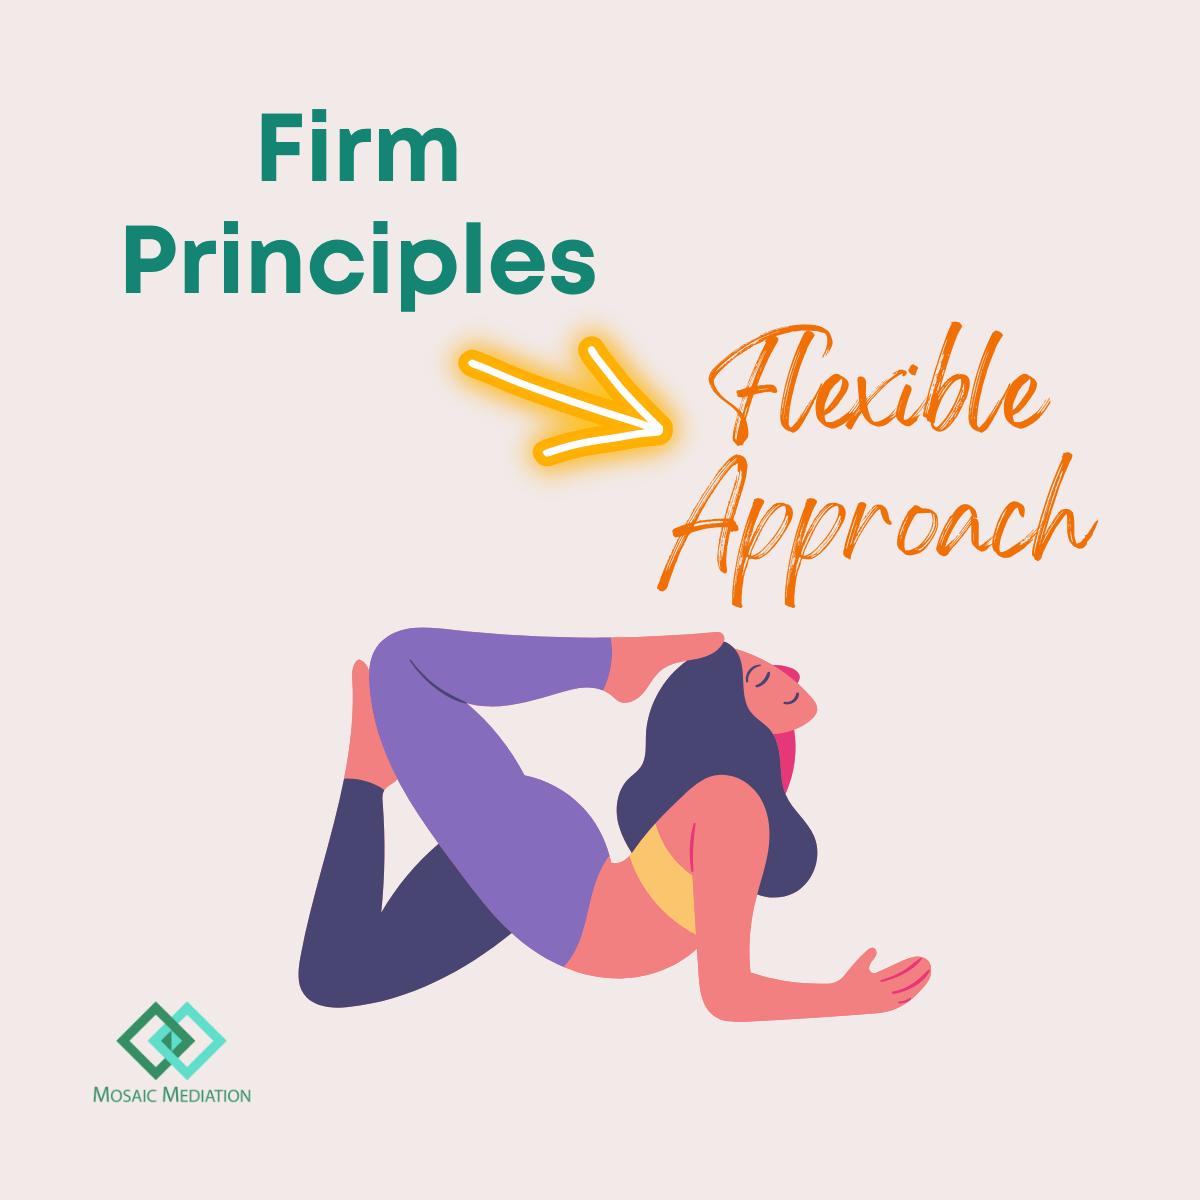 Text: Firm Principles - Flexible Approach. Image: Person holding a yoga pose. Logo: Mosaic Mediation